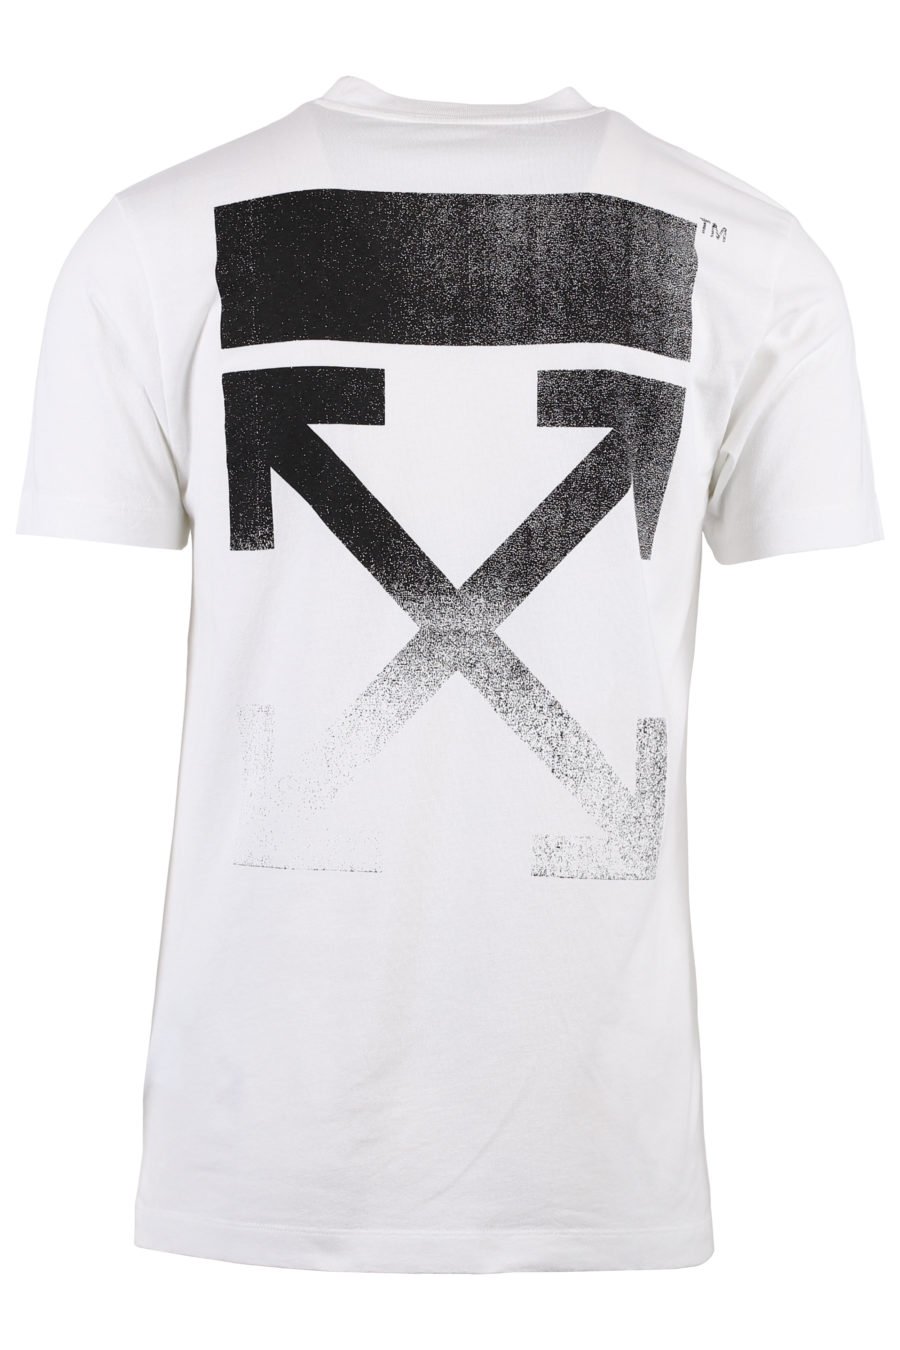 White T-shirt with black arrows in gradient - IMG 1363